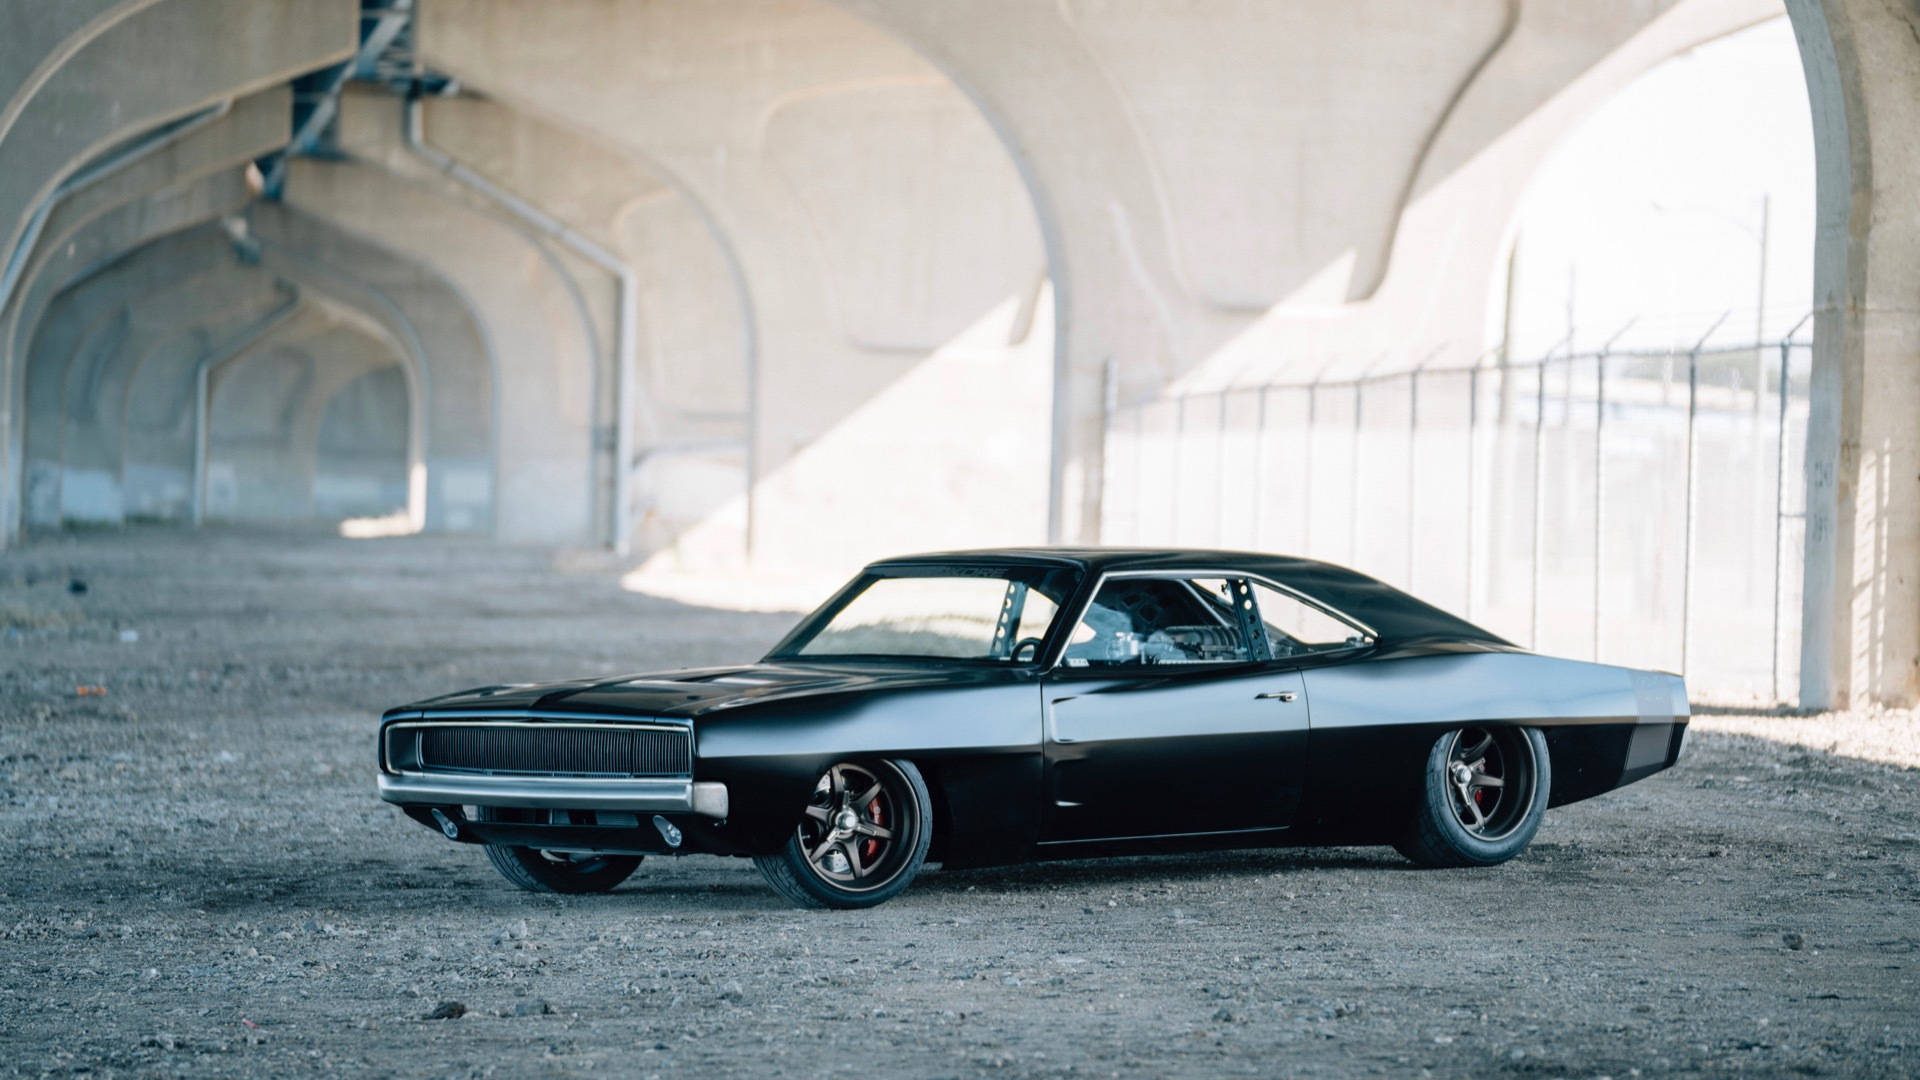 SpeedKore "Hellacious" 1968 Dodge Charger